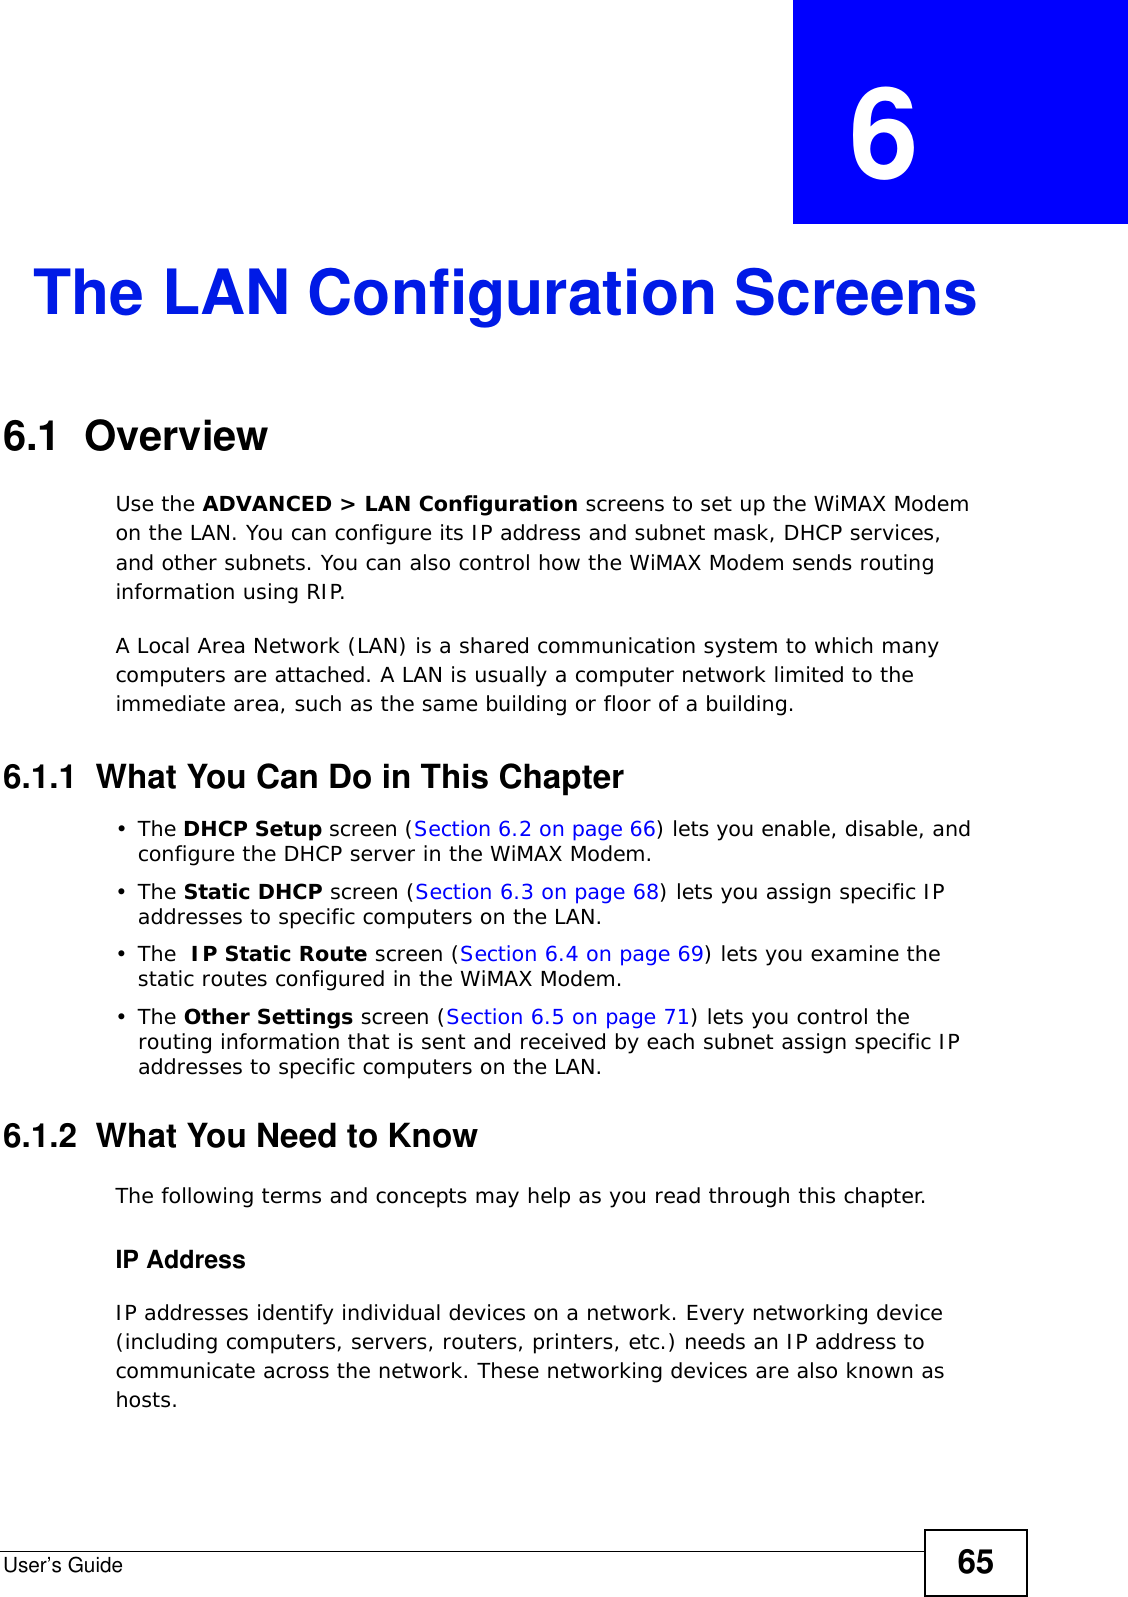 User’s Guide 65CHAPTER  6 The LAN Configuration Screens6.1  OverviewUse the ADVANCED &gt; LAN Configuration screens to set up the WiMAX Modem on the LAN. You can configure its IP address and subnet mask, DHCP services, and other subnets. You can also control how the WiMAX Modem sends routing information using RIP.A Local Area Network (LAN) is a shared communication system to which many computers are attached. A LAN is usually a computer network limited to the immediate area, such as the same building or floor of a building.6.1.1  What You Can Do in This Chapter•The DHCP Setup screen (Section 6.2 on page 66) lets you enable, disable, and configure the DHCP server in the WiMAX Modem.•The Static DHCP screen (Section 6.3 on page 68) lets you assign specific IP addresses to specific computers on the LAN.•The  IP Static Route screen (Section 6.4 on page 69) lets you examine the static routes configured in the WiMAX Modem.•The Other Settings screen (Section 6.5 on page 71) lets you control the routing information that is sent and received by each subnet assign specific IP addresses to specific computers on the LAN.6.1.2  What You Need to KnowThe following terms and concepts may help as you read through this chapter.IP AddressIP addresses identify individual devices on a network. Every networking device (including computers, servers, routers, printers, etc.) needs an IP address to communicate across the network. These networking devices are also known as hosts.